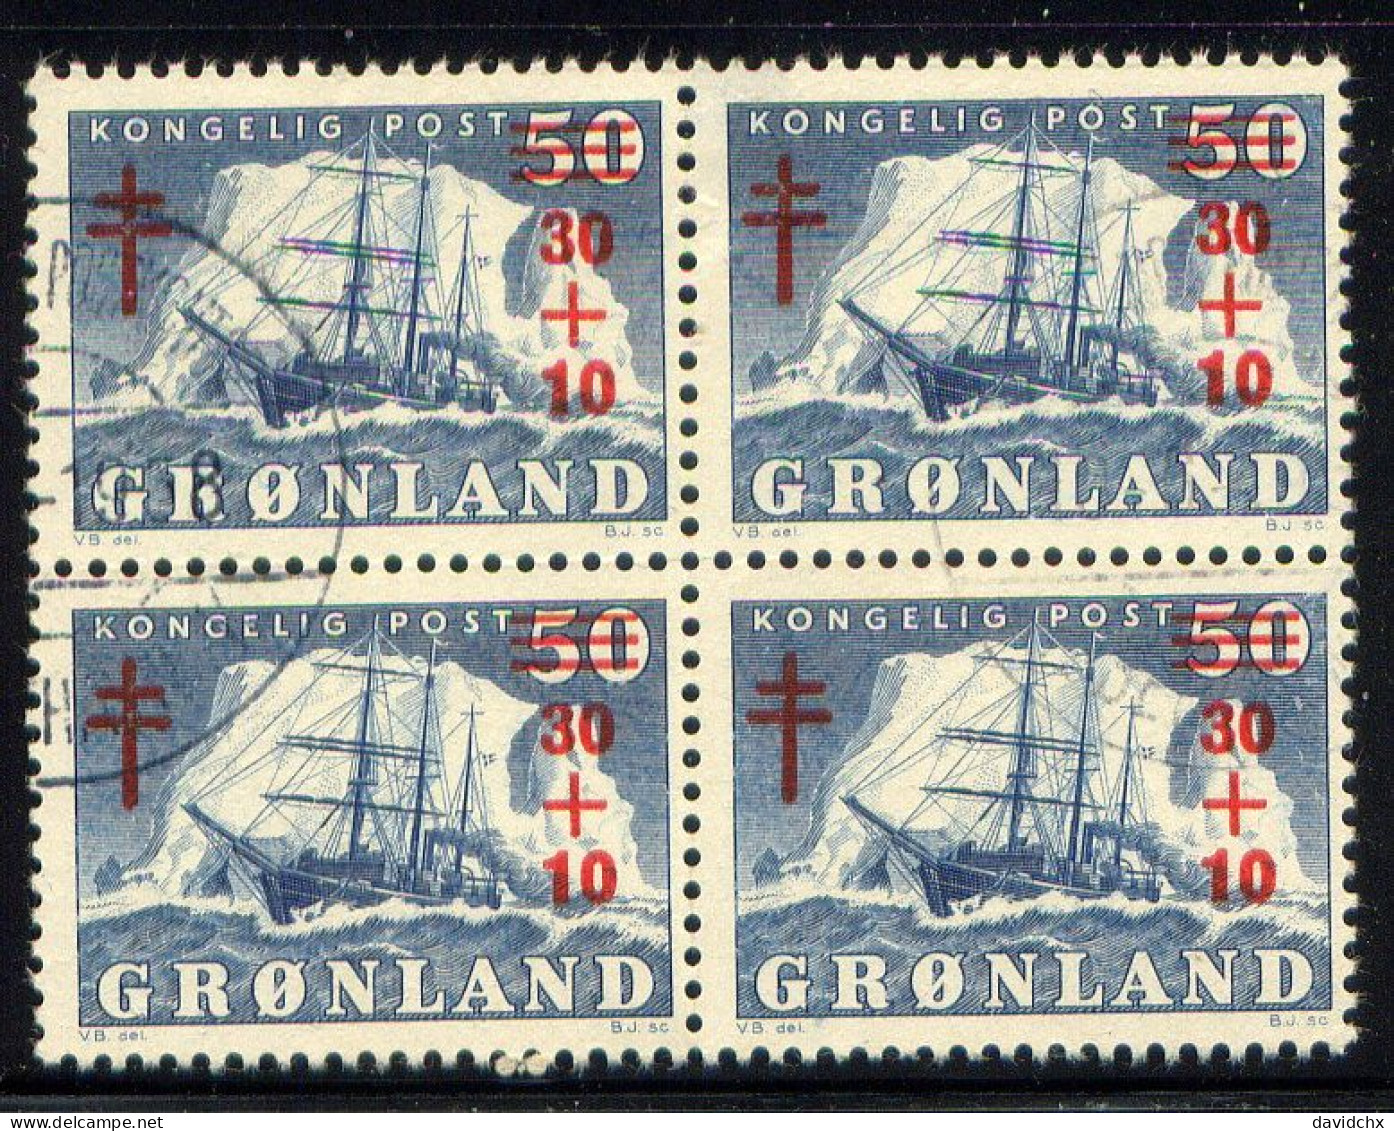 GREENLAND, BLOCK OF 4, NO. B1 - Used Stamps